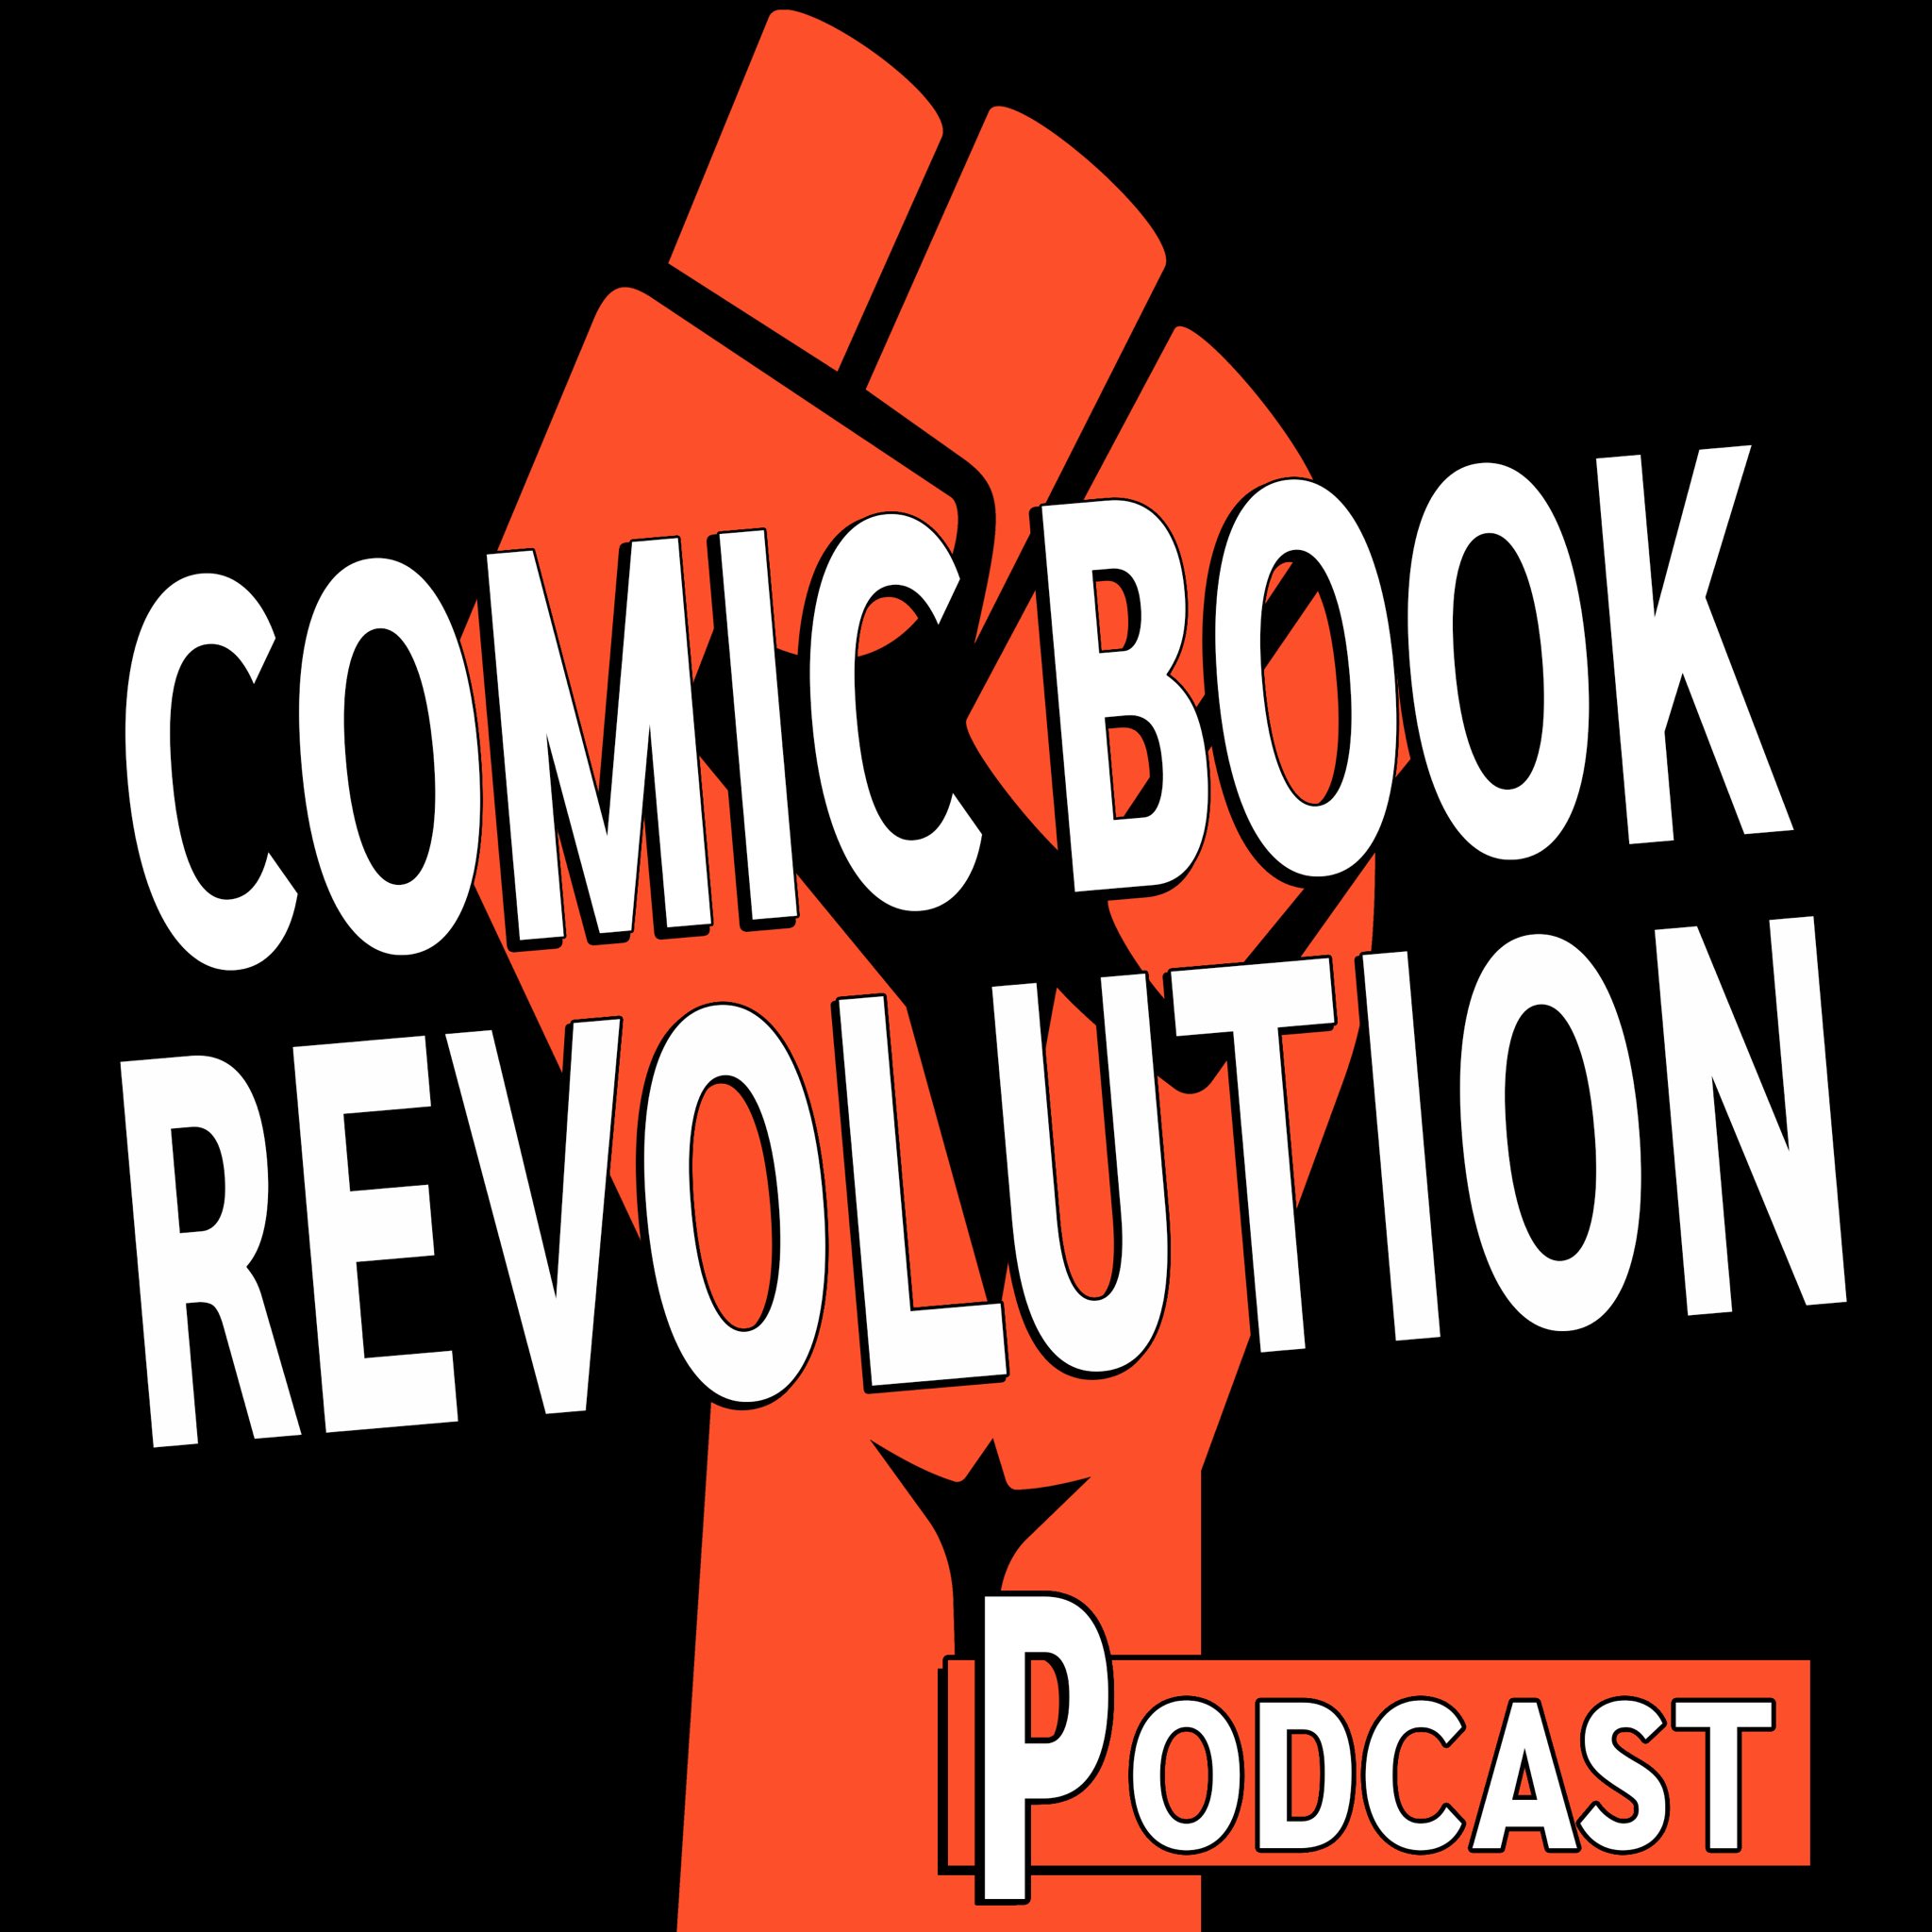 Comic Book Revolution Podcast - Episode 92 - Justice League #75 Review - Death of the Justice League